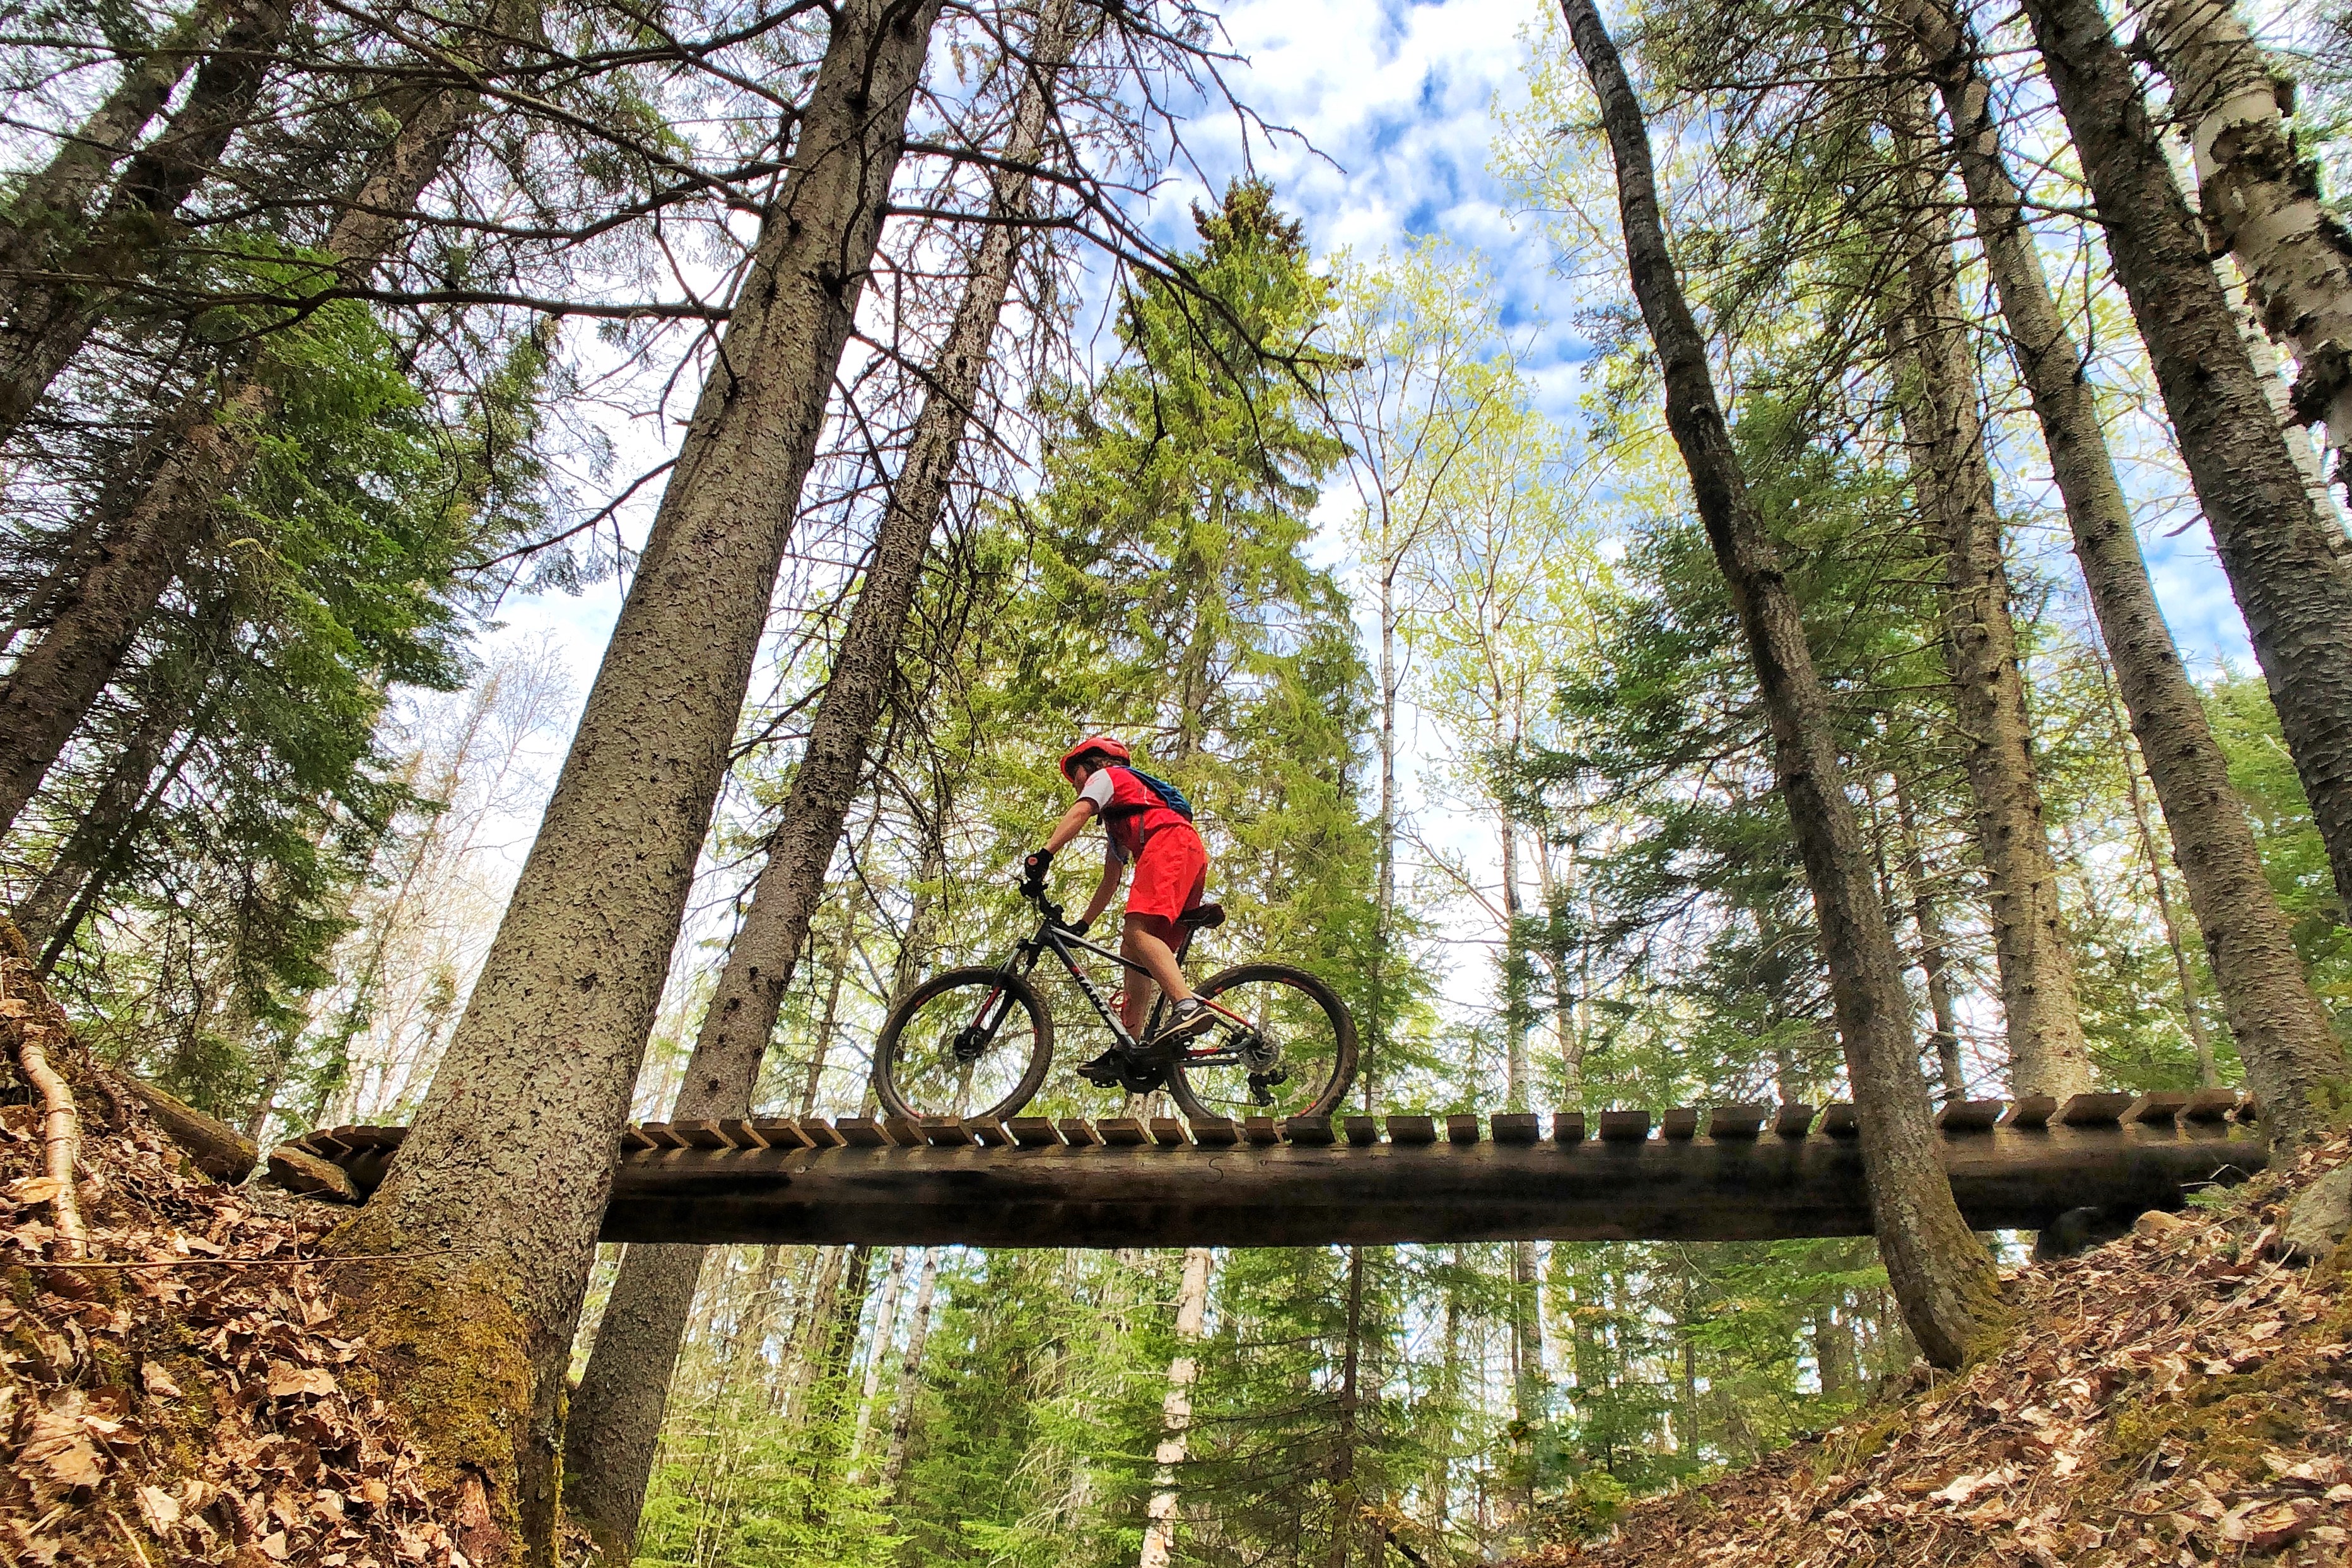 a mountain biker rides across a wooden bridge in the forest